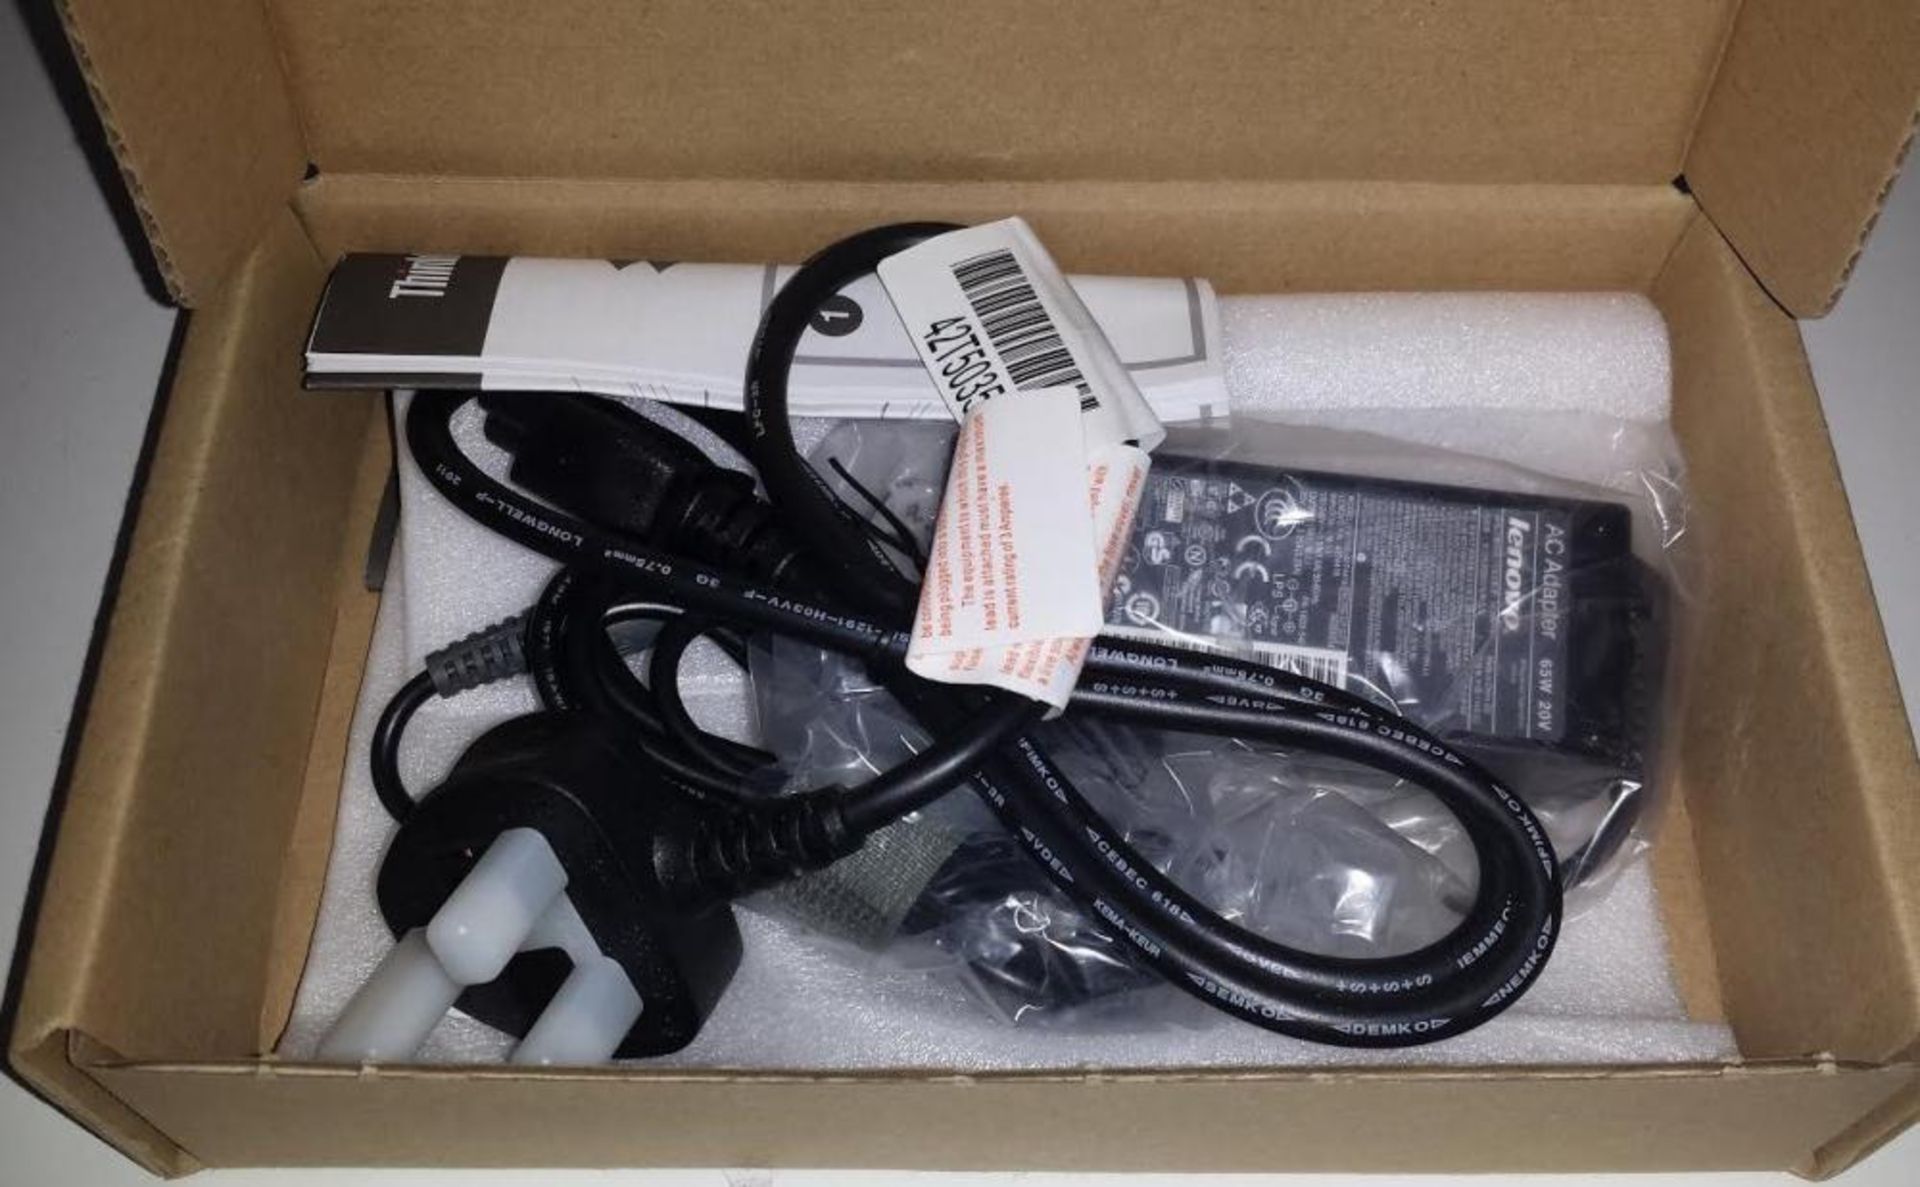 1 x ThinkPad and Lenovo 65W Ultraportable AC Laptop Adapter - New in Box - CL400 - Ref JP1036 - Loca - Image 3 of 3